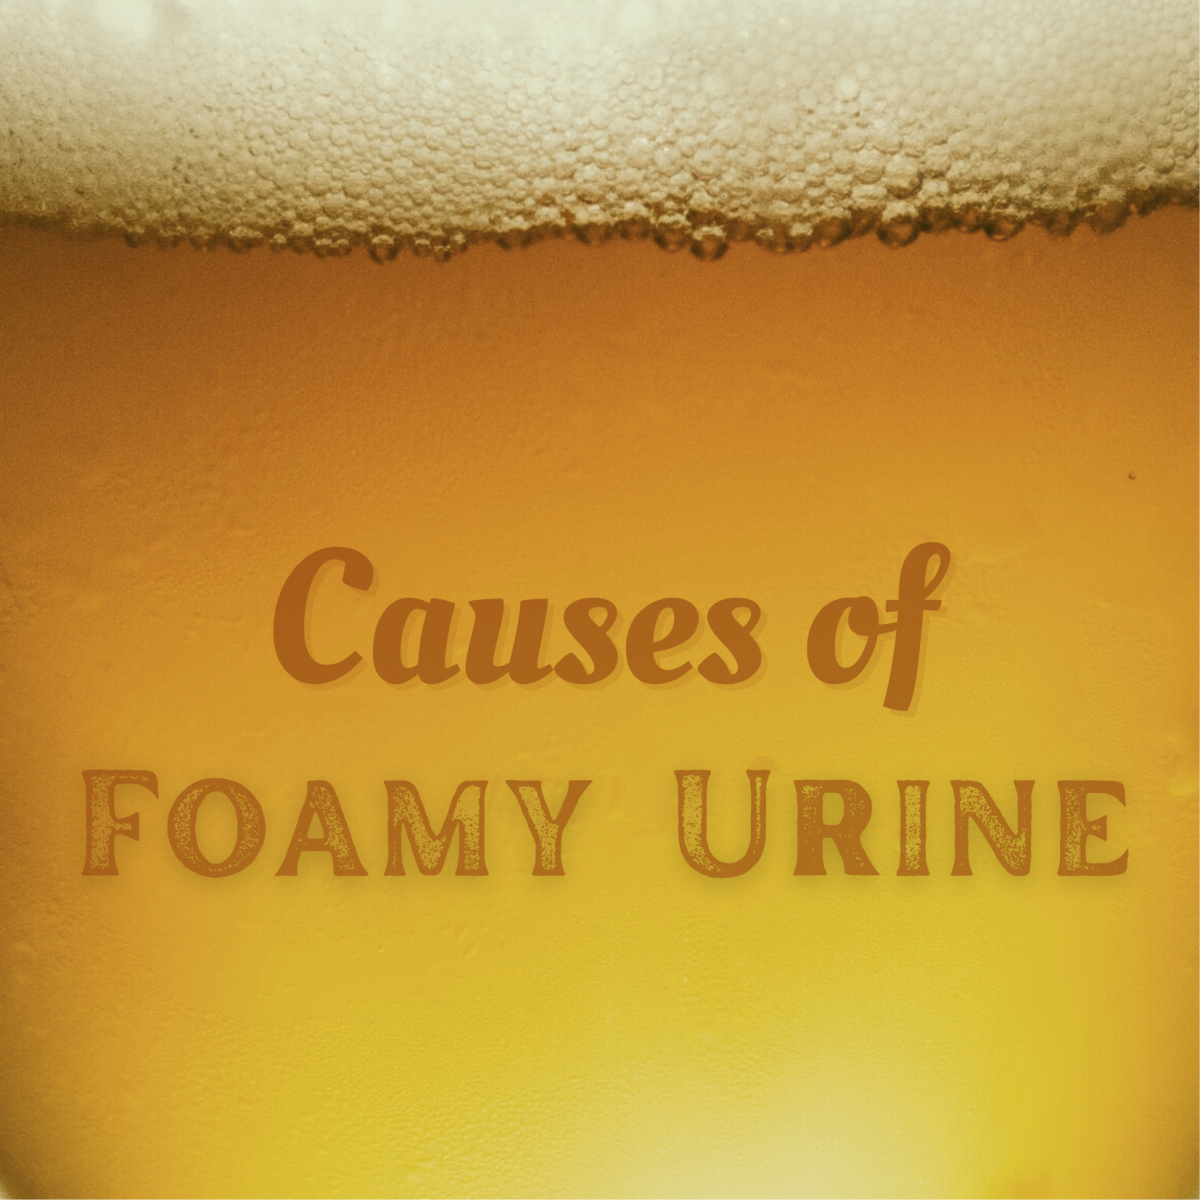 What causes foamy, frothy urine?